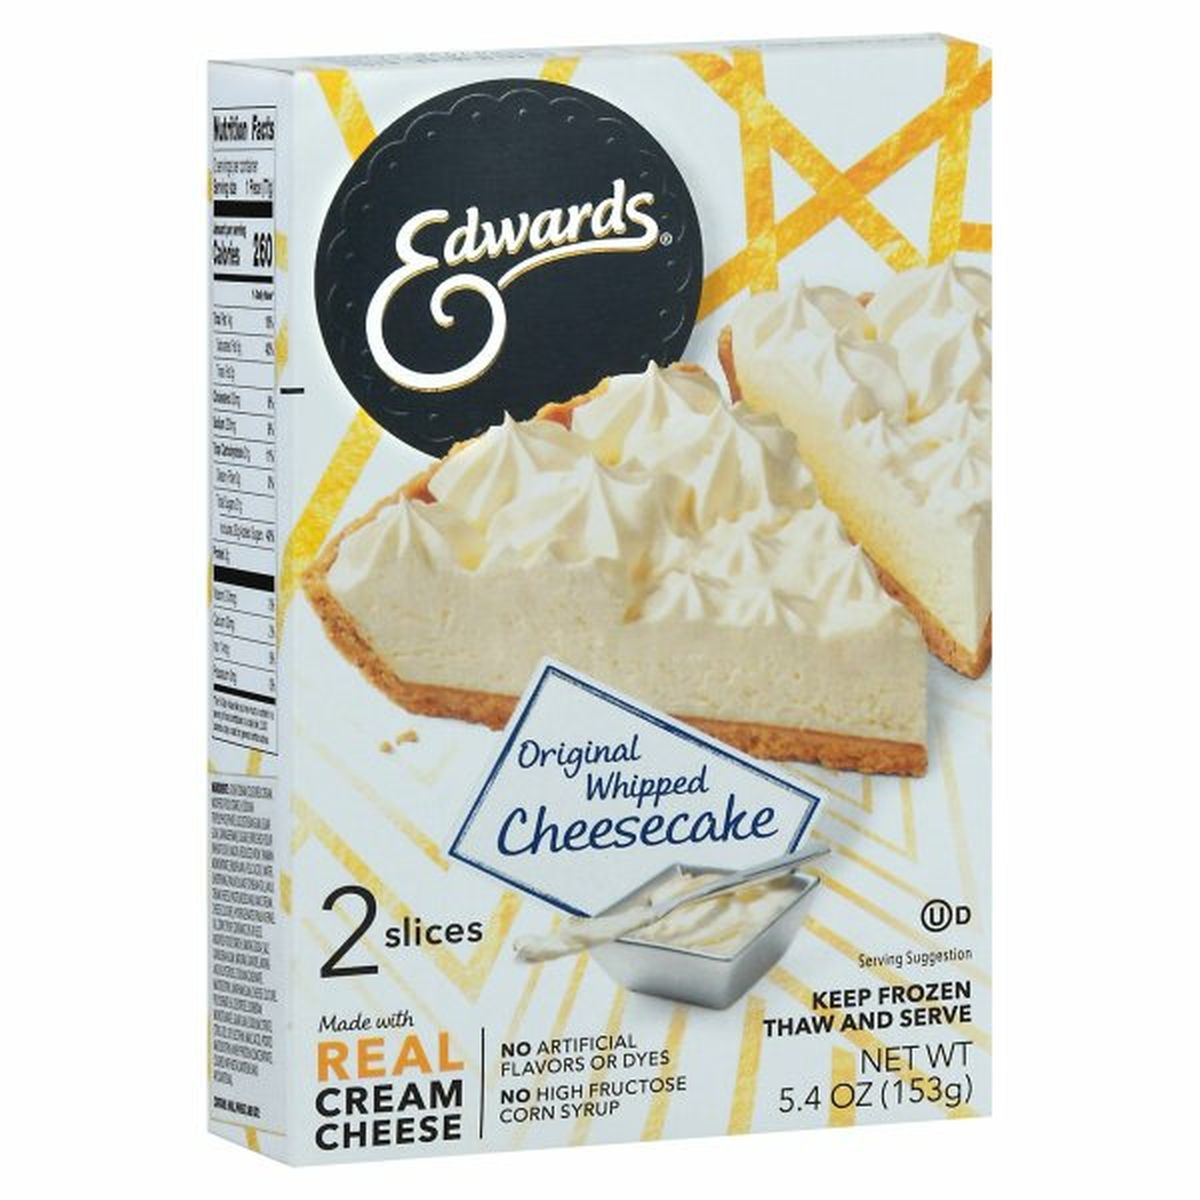 Calories in Edwards Cheesecake, Whipped, Original